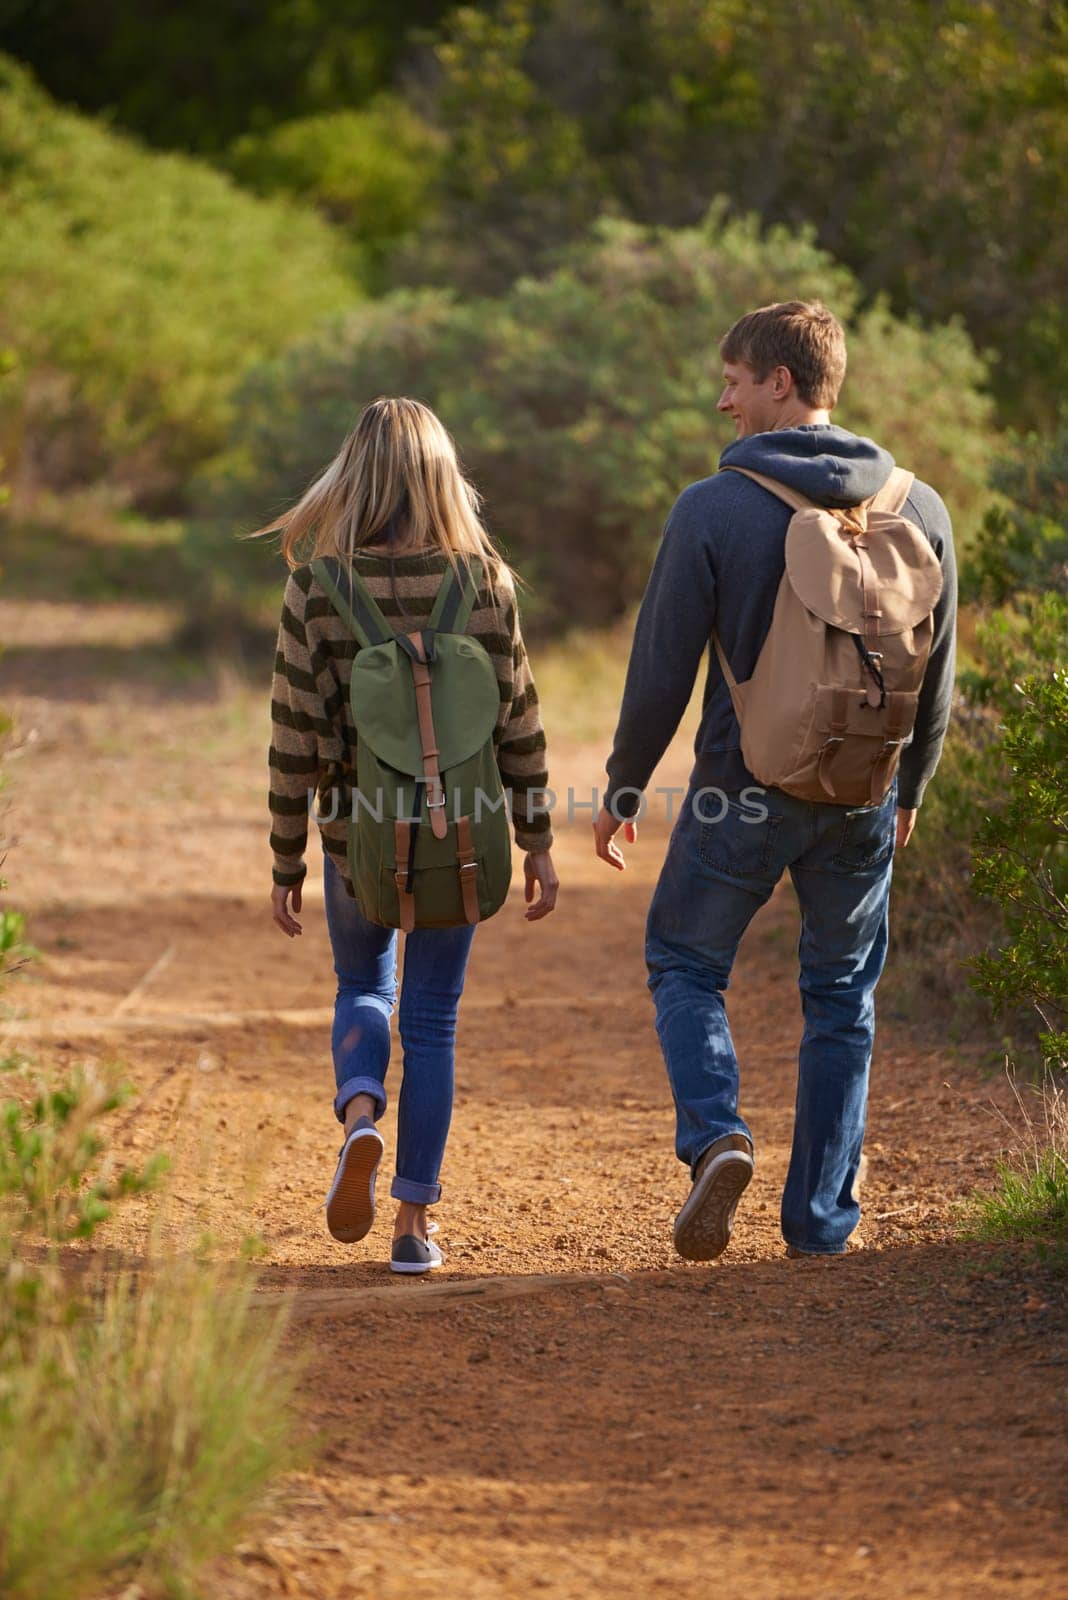 Path, hiking and happy couple walking in nature for holiday, travel or adventure outdoor with backpack. Rear view, man and woman trekking in the countryside on vacation, journey and date together.